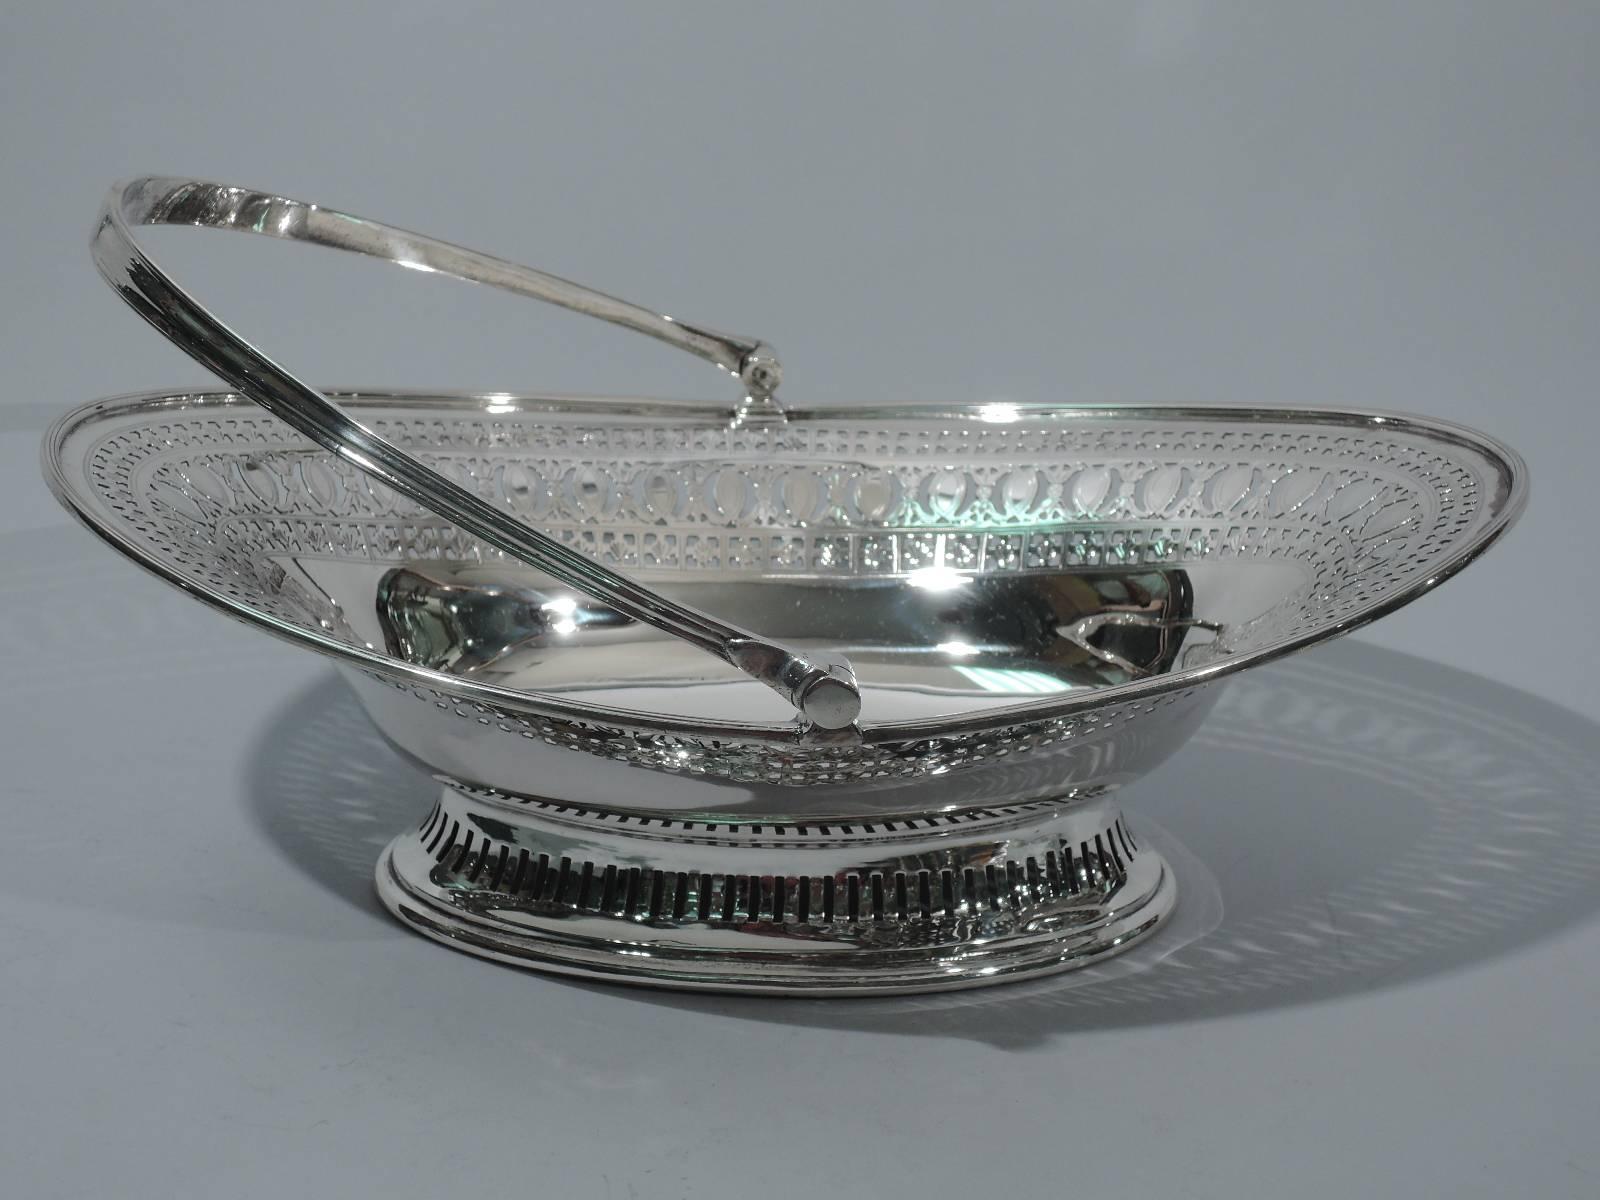 Edwardian neoclassical sterling silver basket. Made by Walker & Hall in Sheffield in 1902. Ovoid with tapering sides and flared rim. Rests on raised ovoid foot. Tapering swing handle. Solid well bordered by pierced and engraved ornament. Foot has